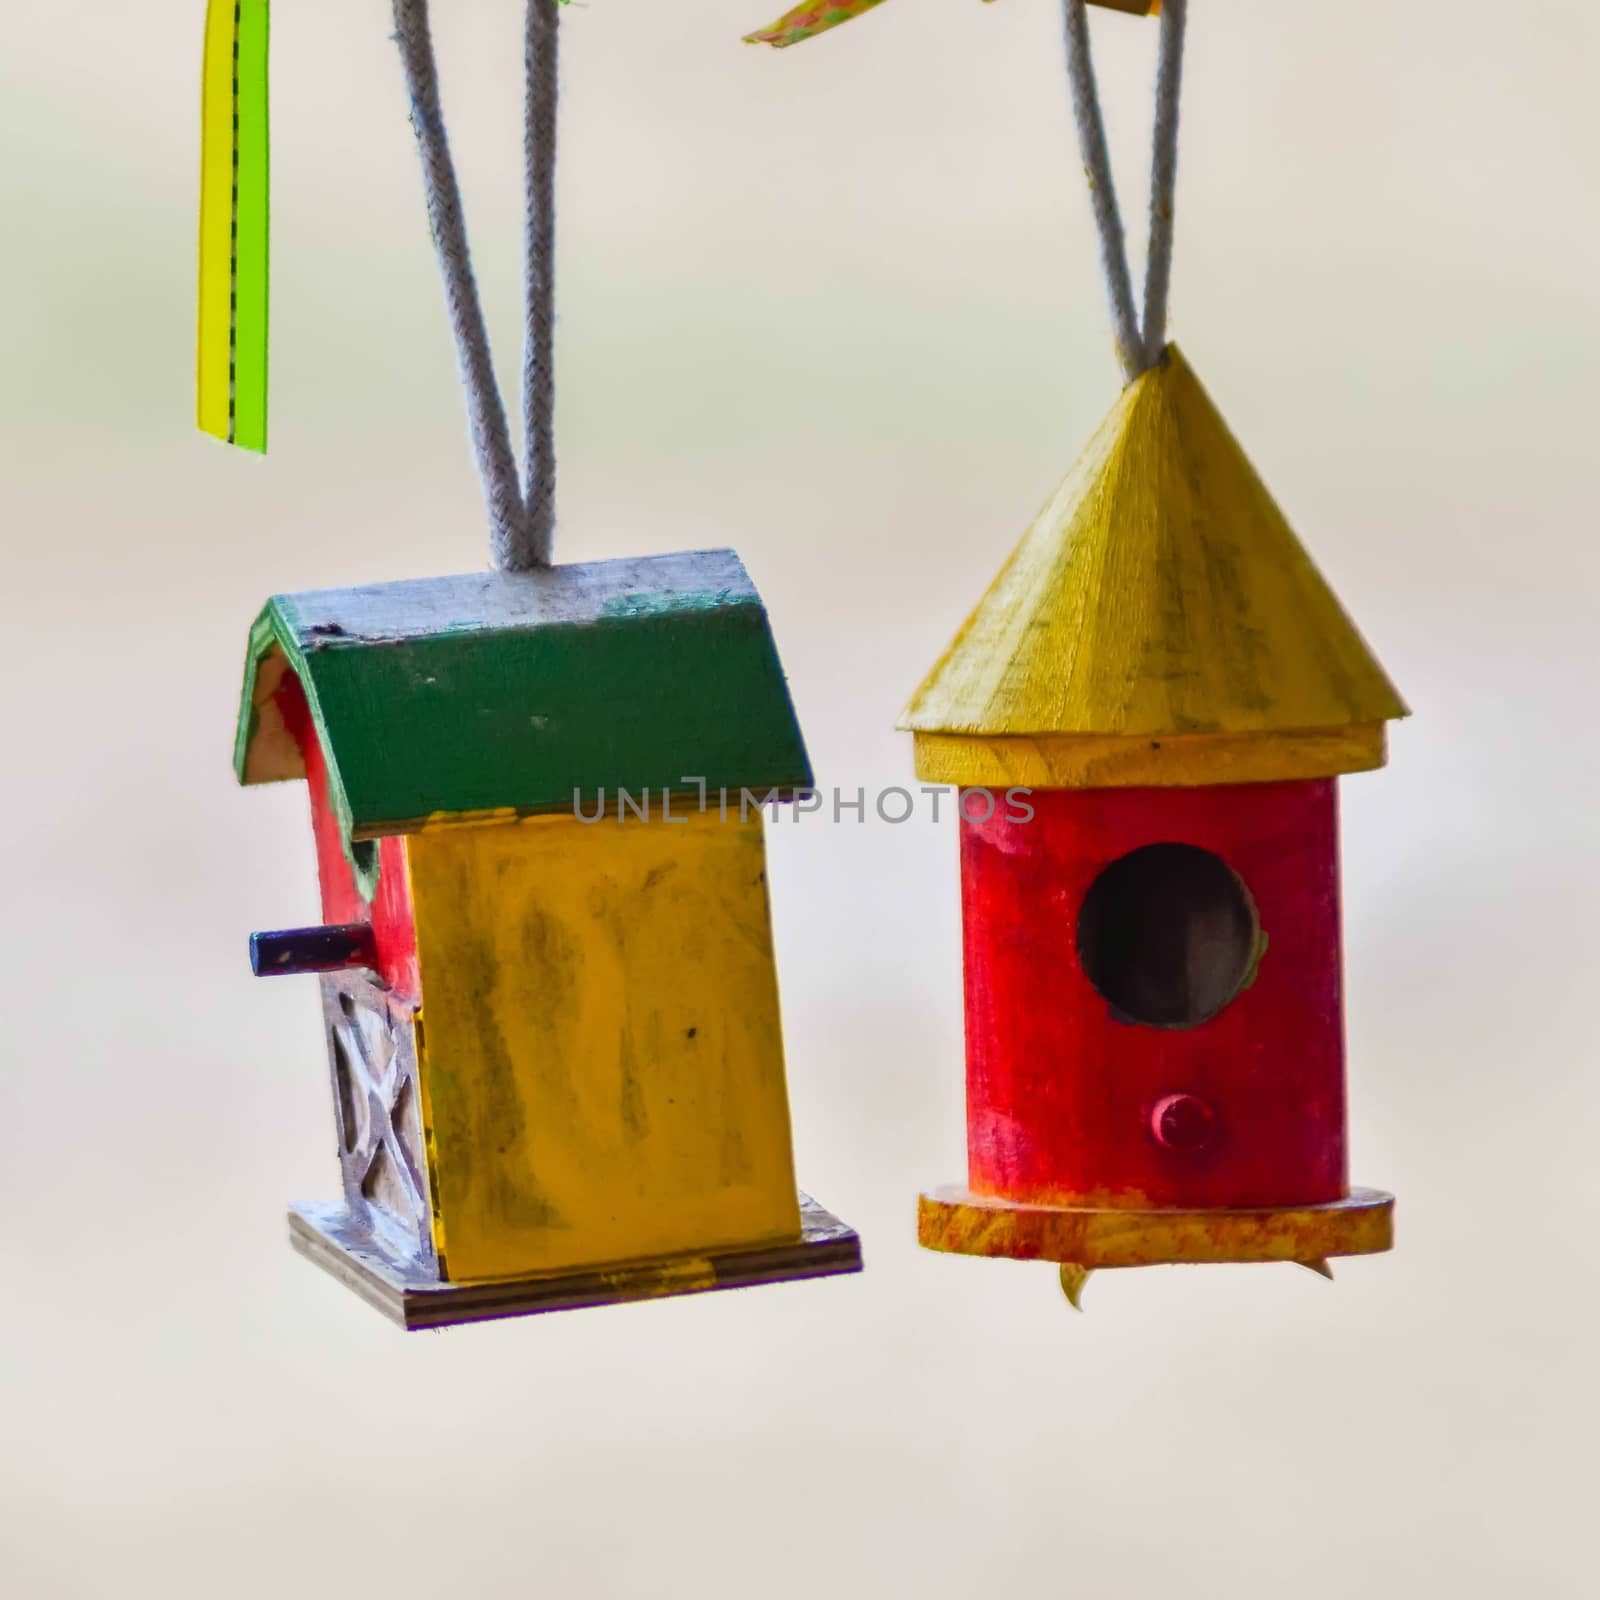 little colorful bird houses on clothes line